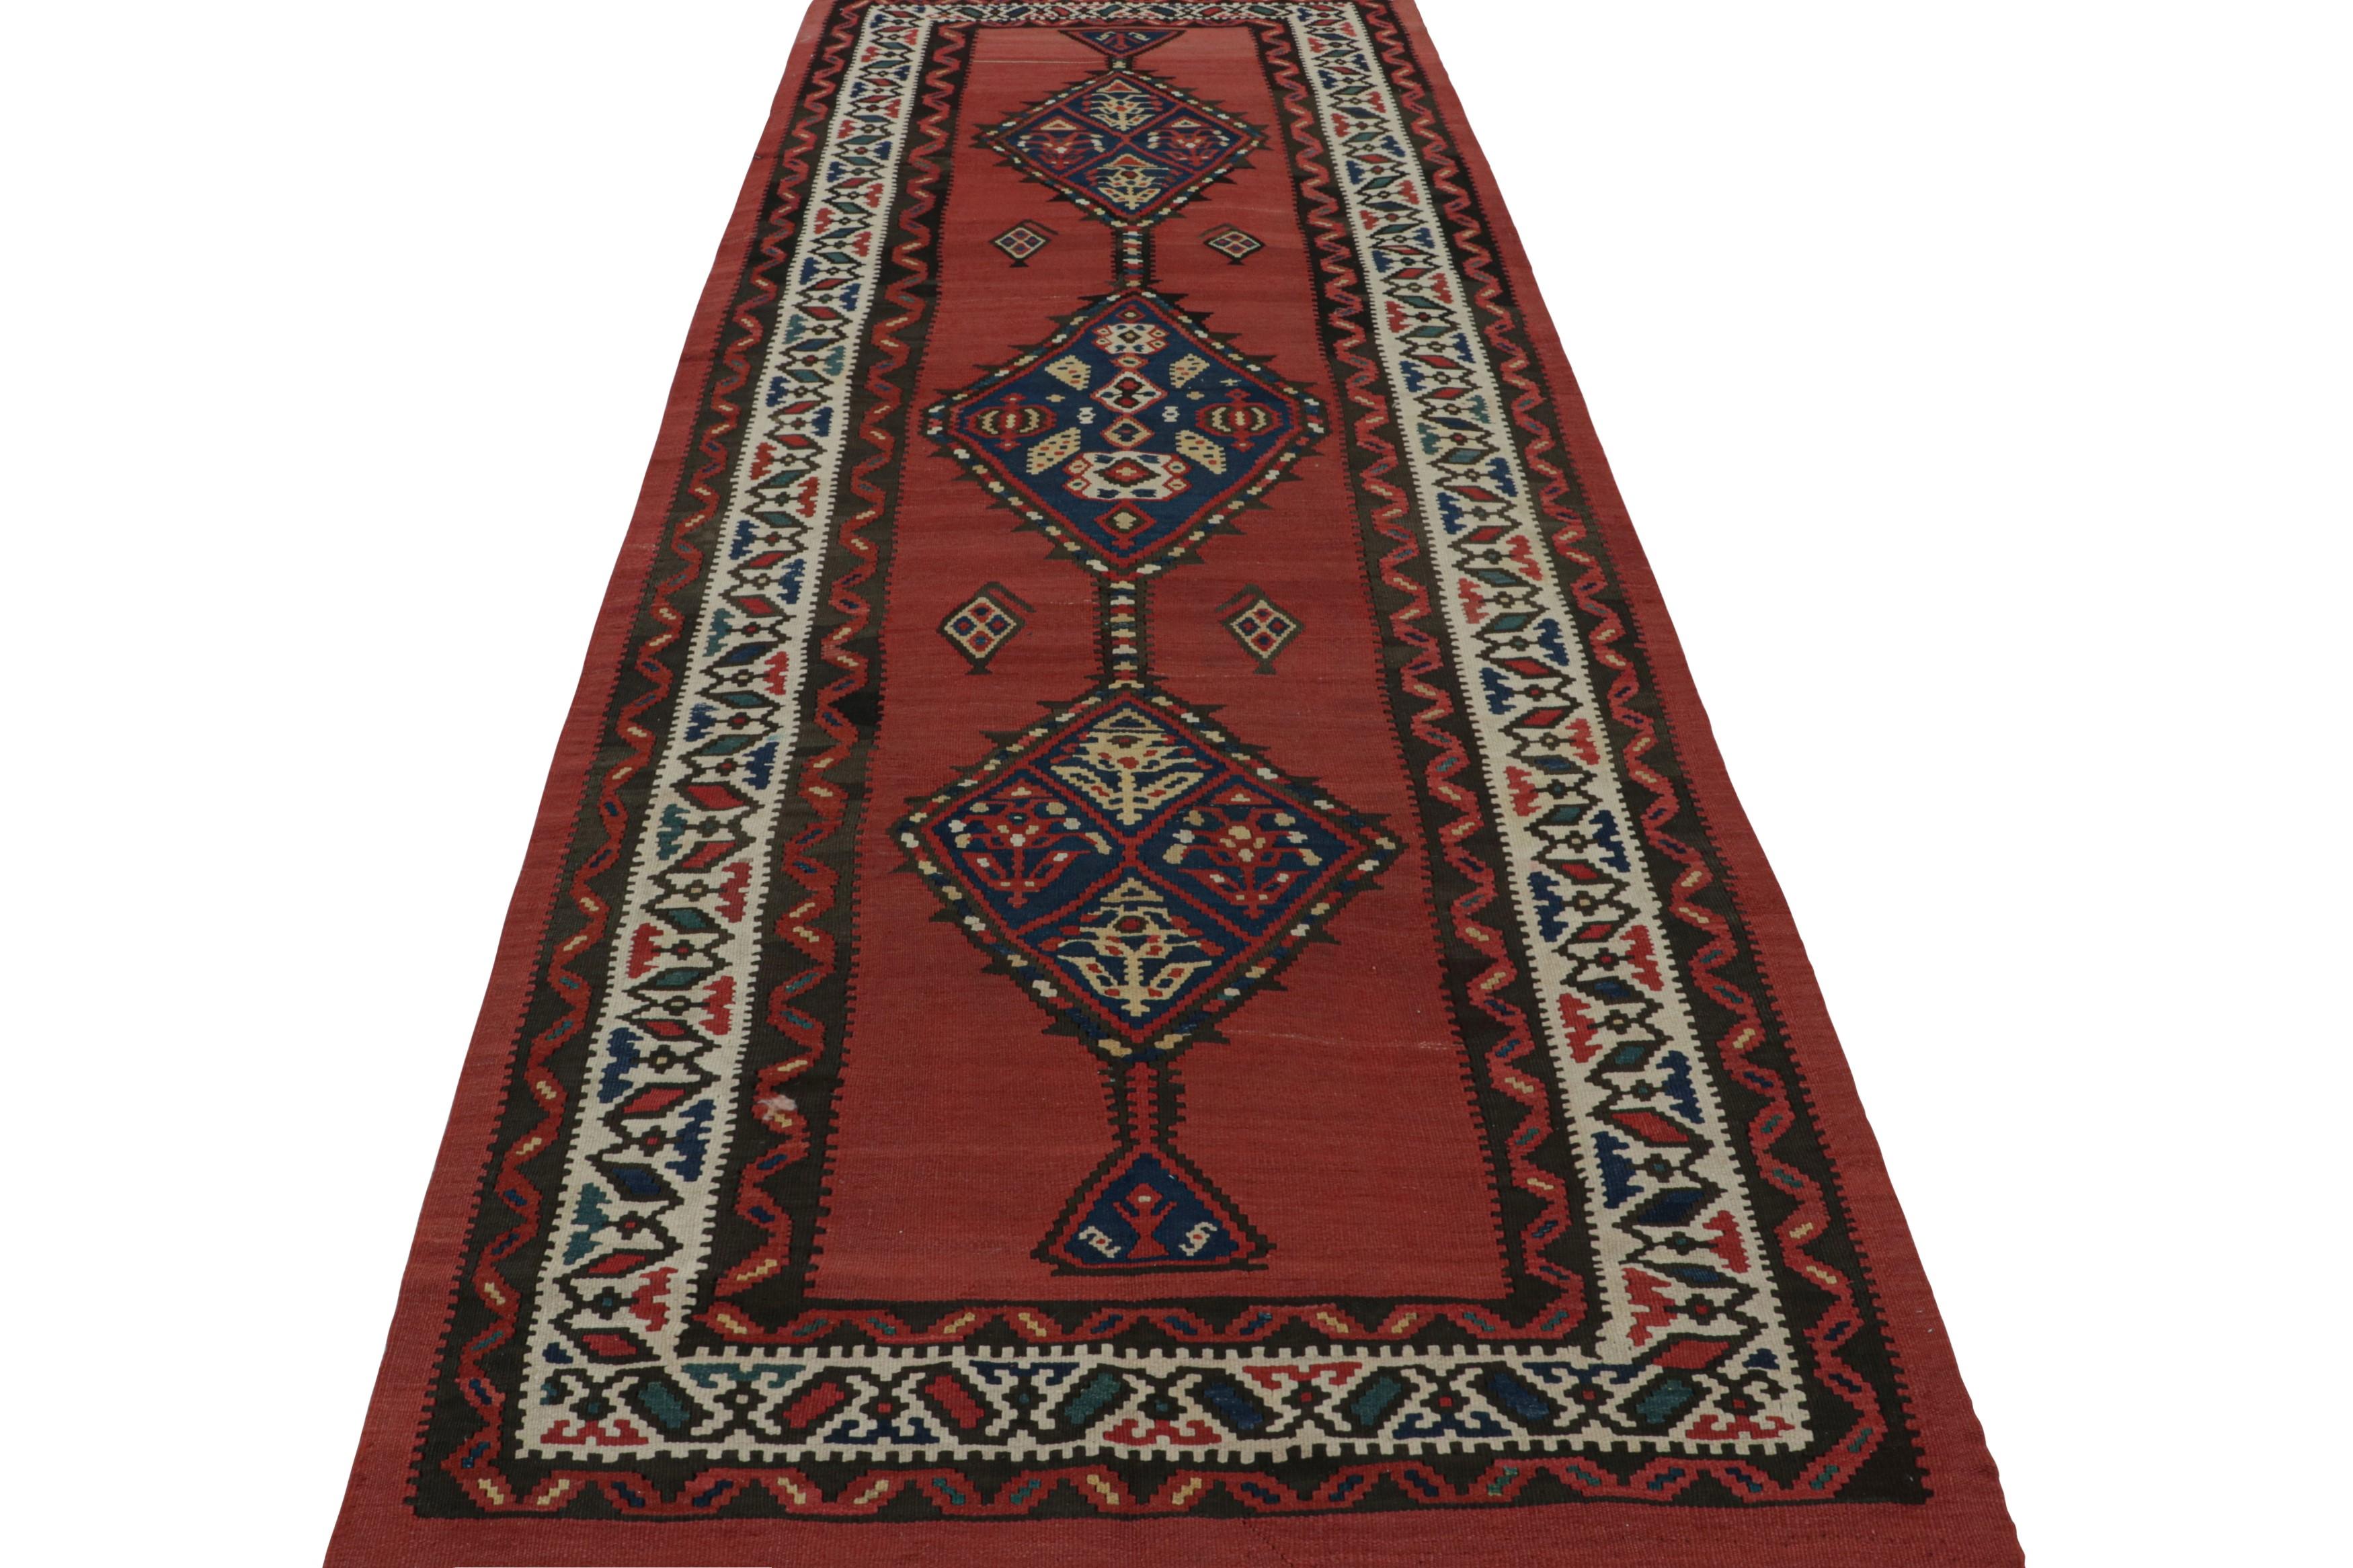 Tribal Vintage Persian tribal Kilim Runner rug with Medallions from Rug & Kilim For Sale